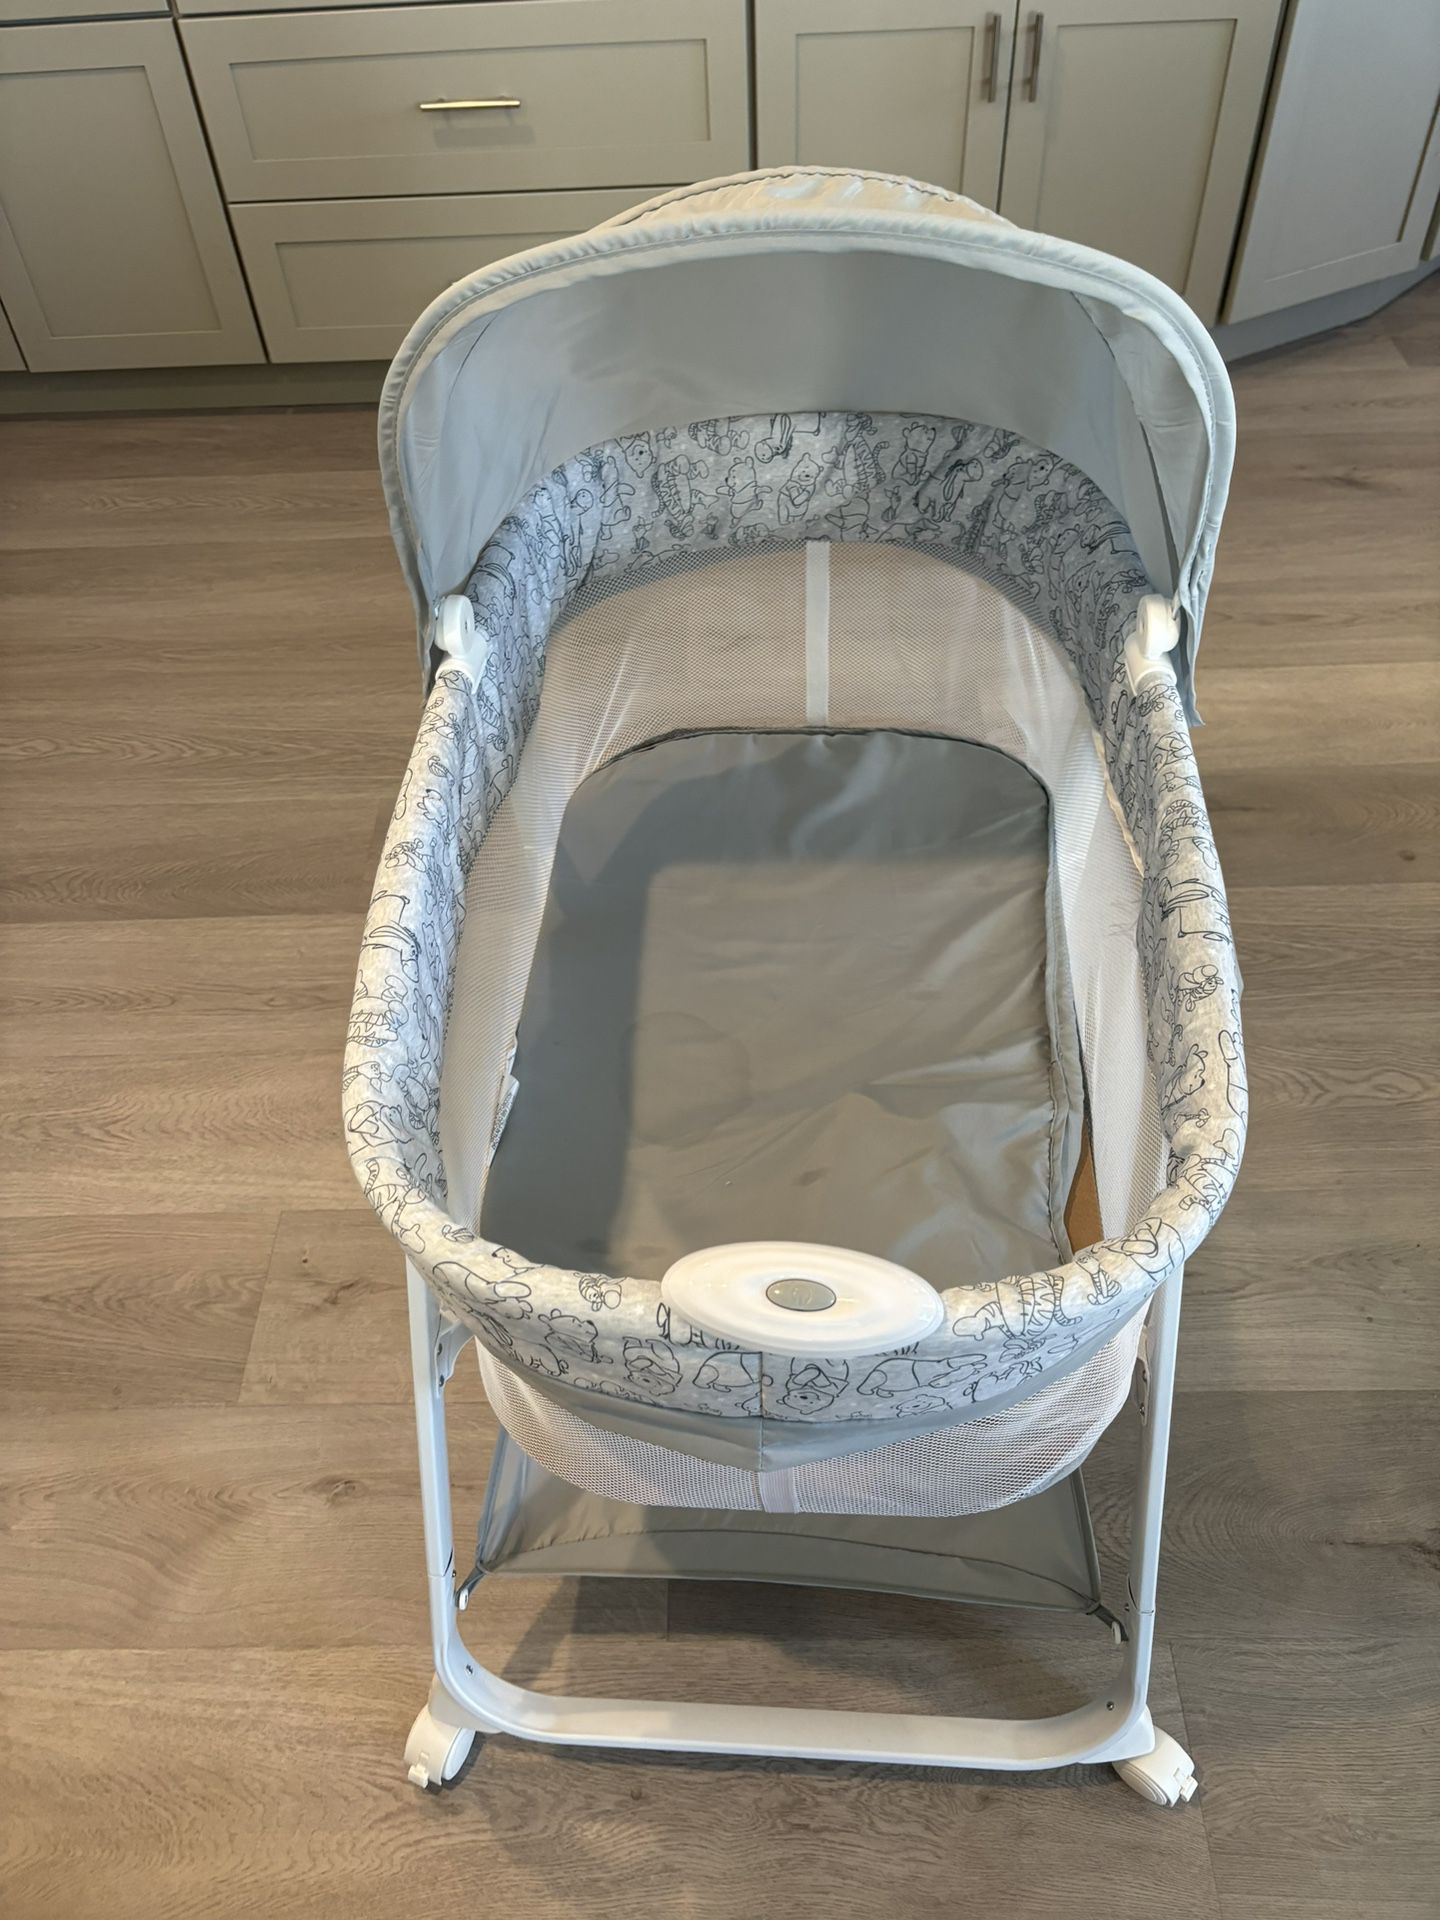 Bassinet And Play Mat/gym